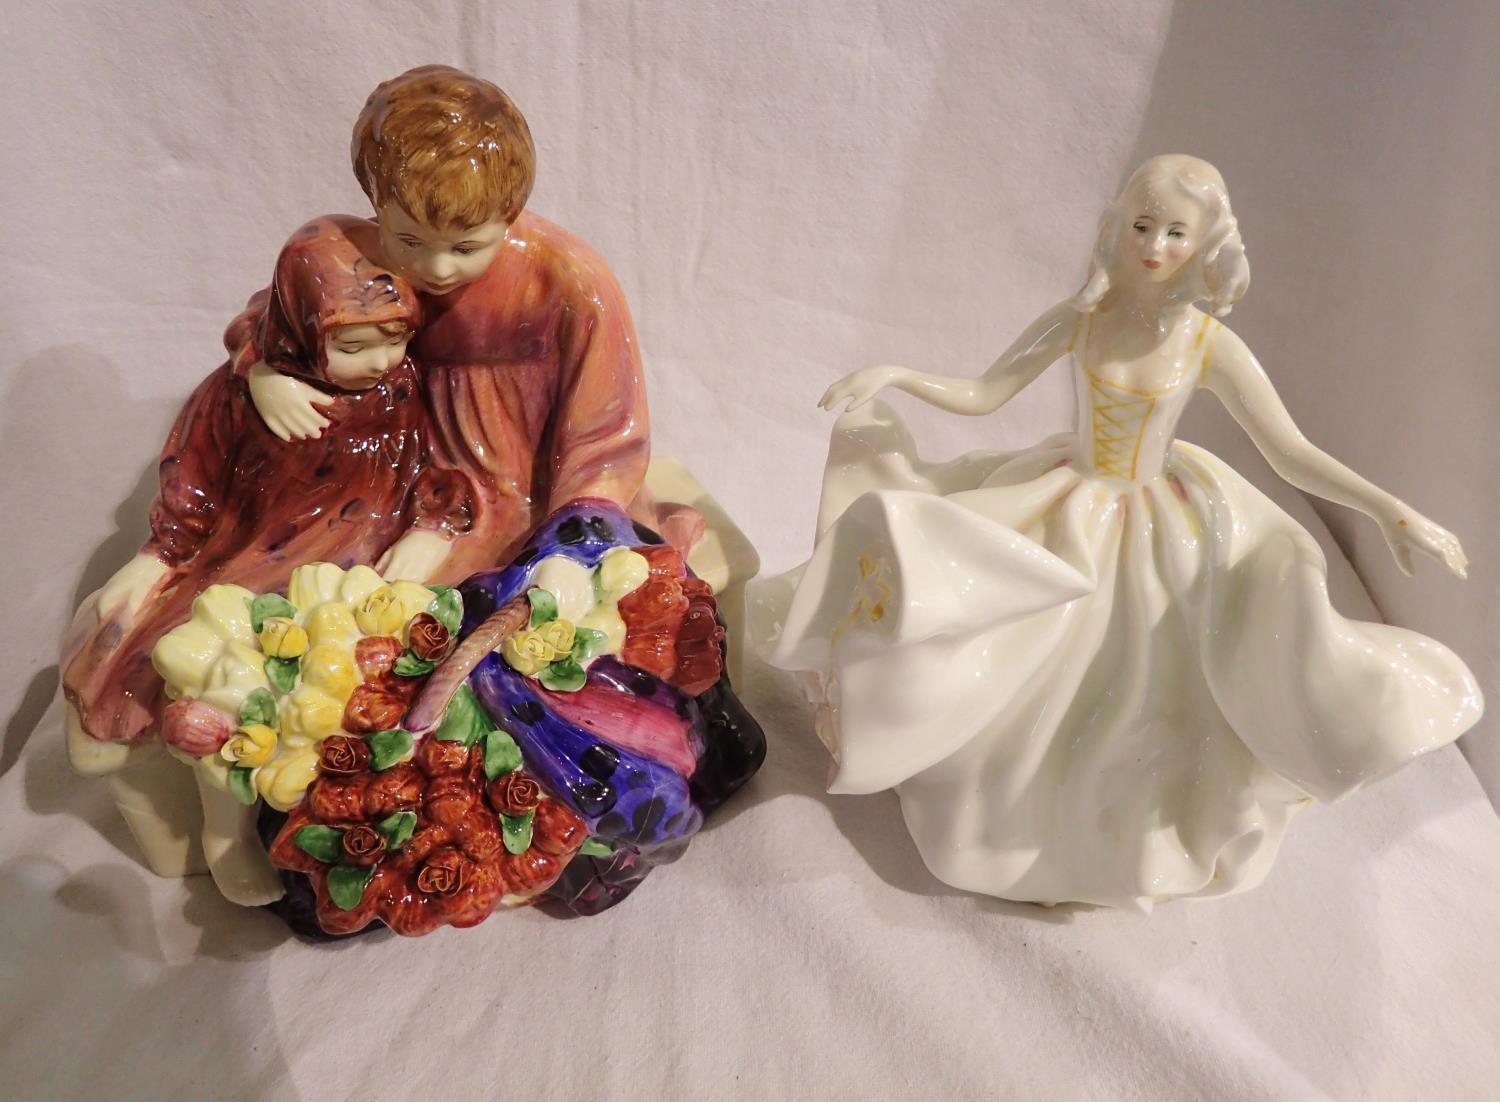 Royal Doulton Flower Seller and Sweet Seventeen figurines, both with damages. Not available for in-